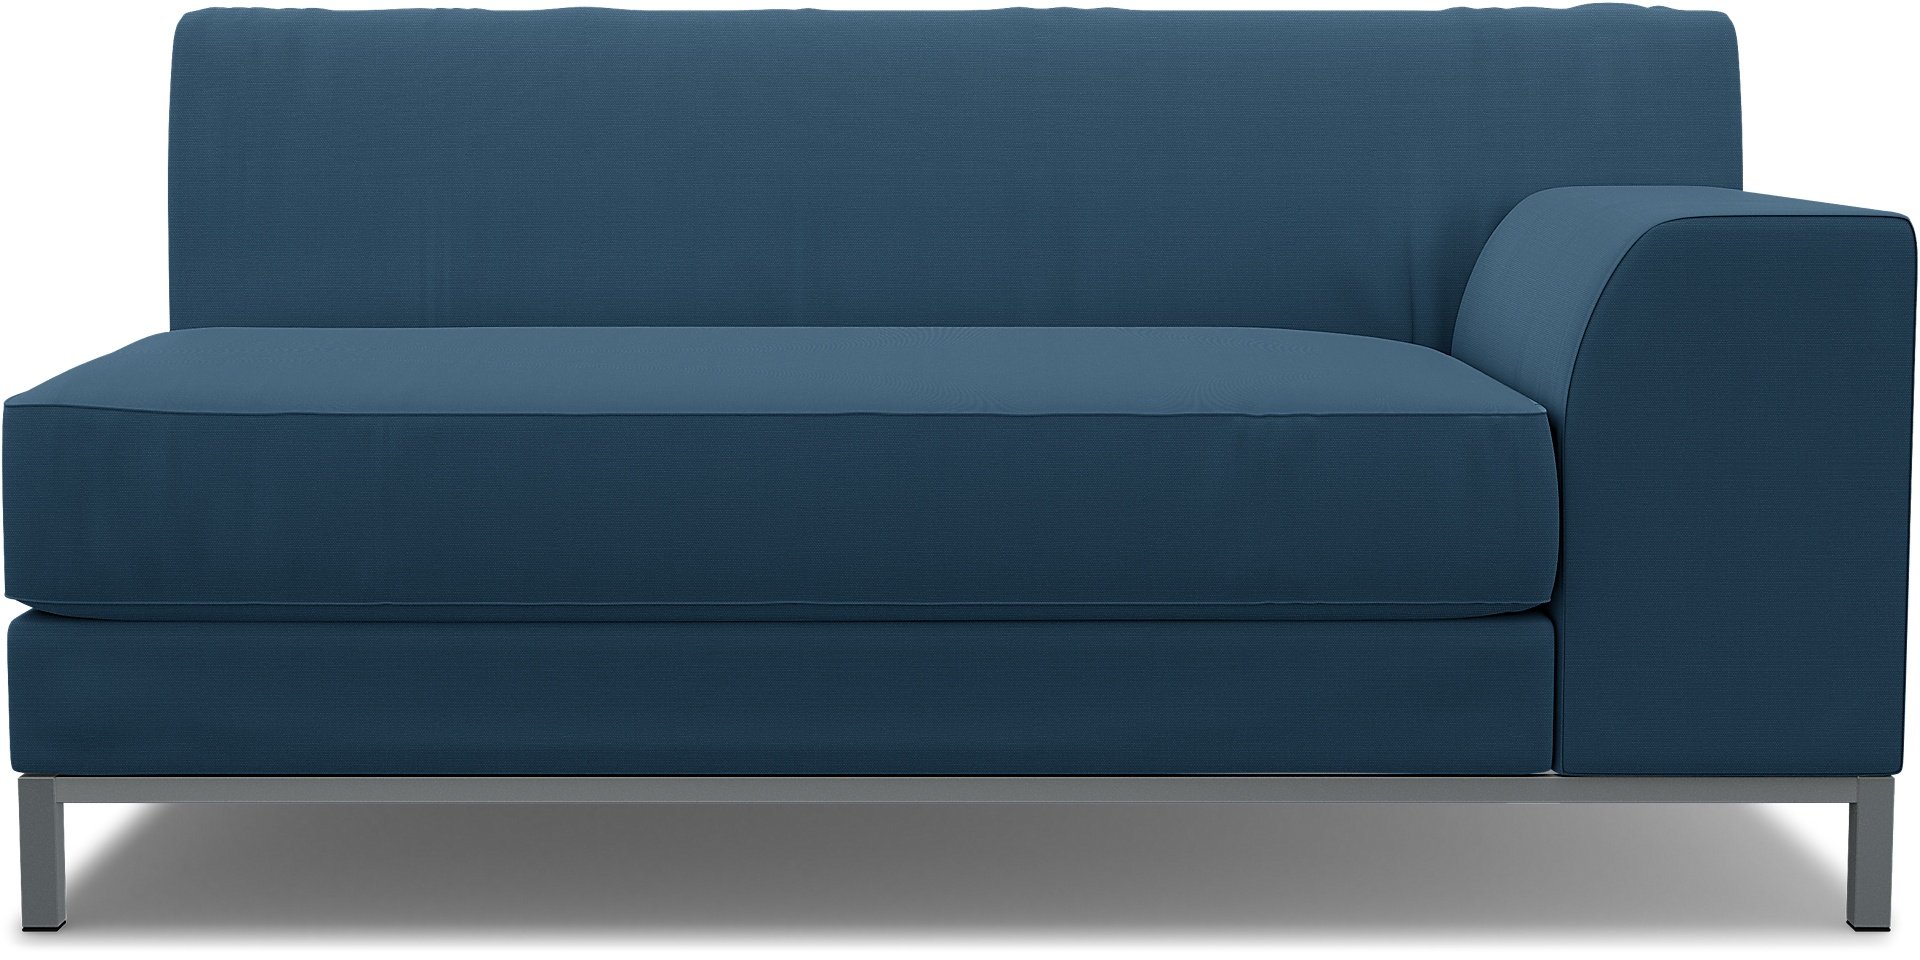 IKEA - Kramfors 2 Seater Sofa with Right Arm Cover, Real Teal, Cotton - Bemz